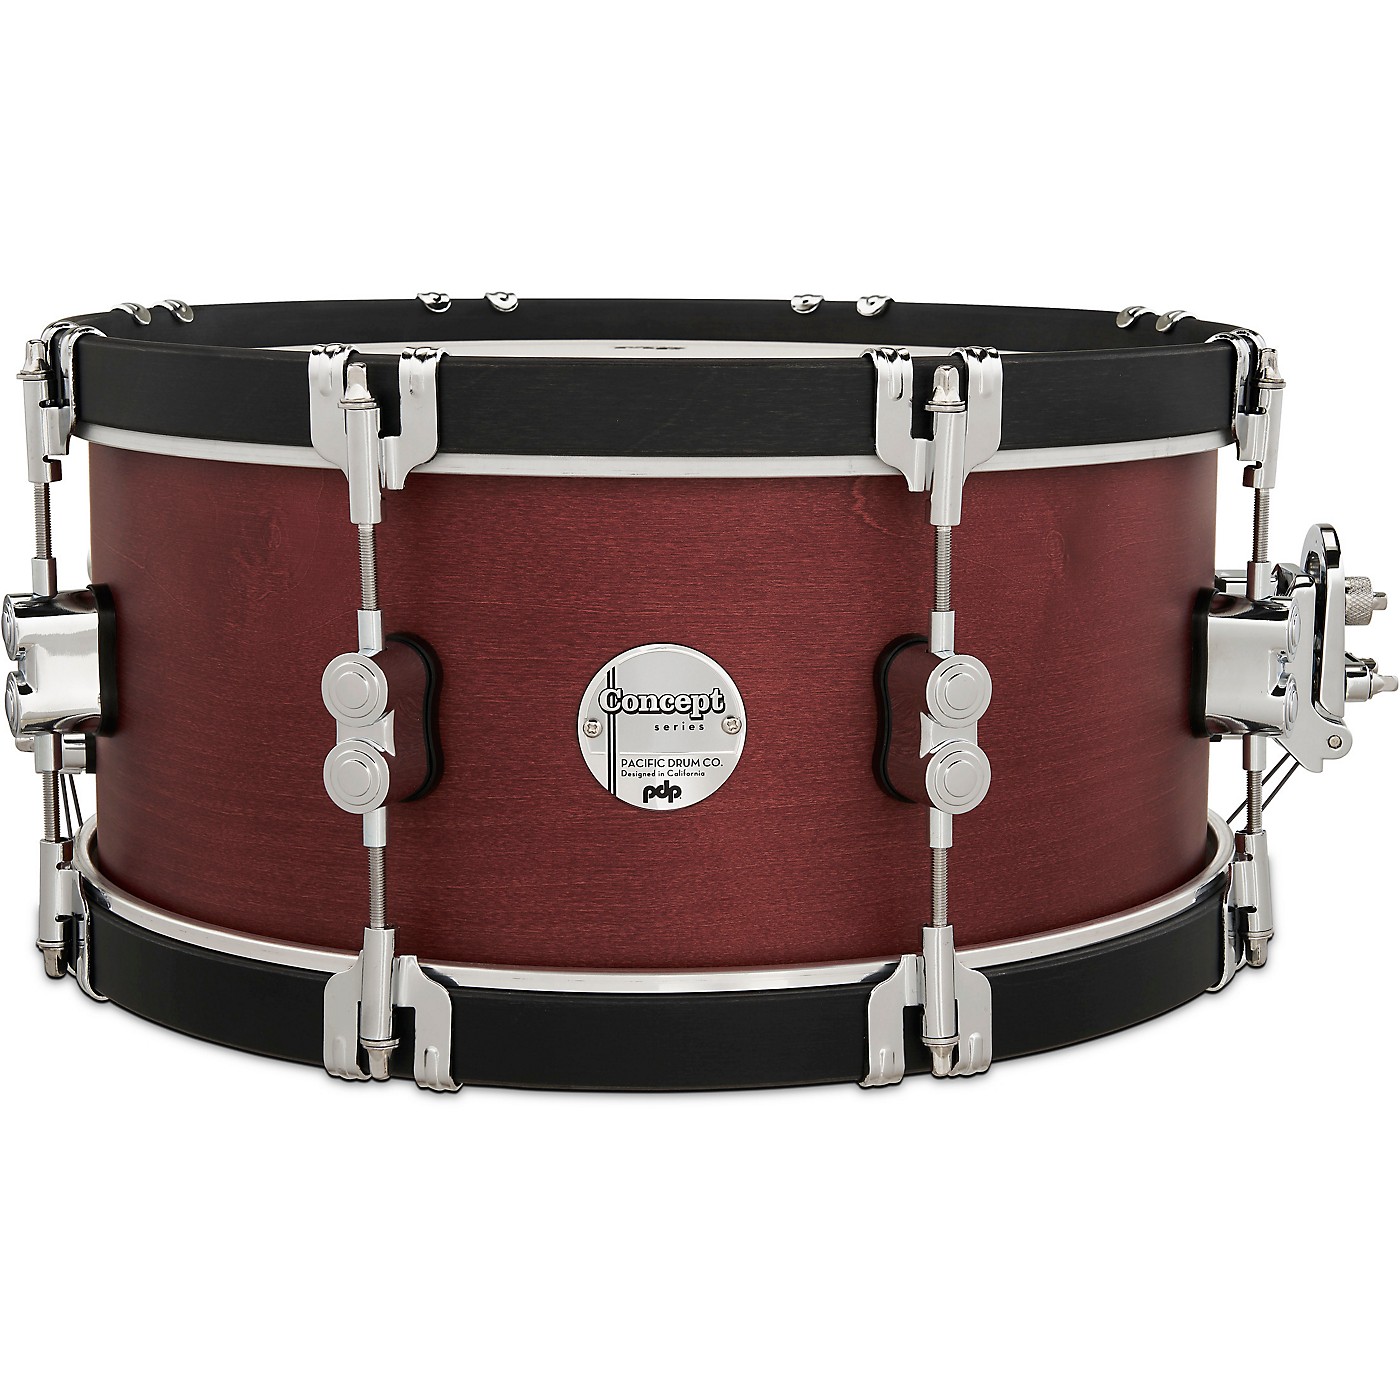 PDP by DW Concept Classic Snare Drum with Wood Hoops thumbnail